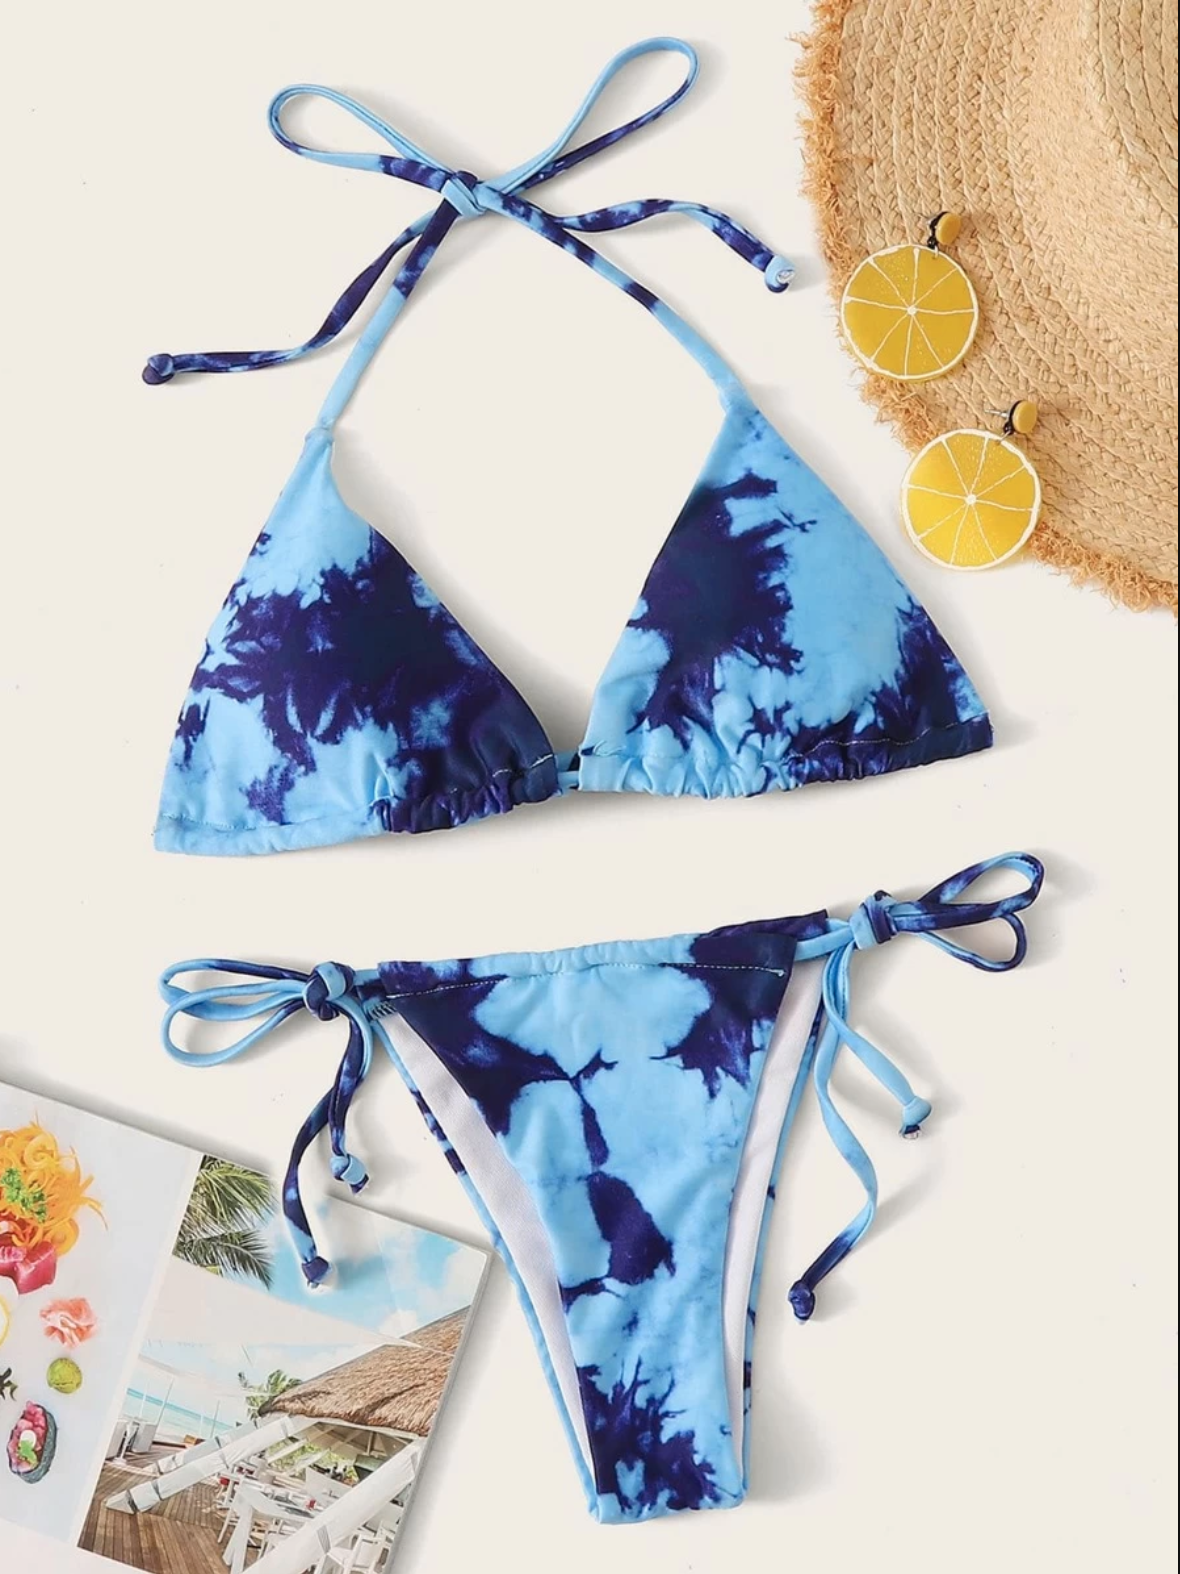 5 Tips to Look Good in a Bikini in This Summer